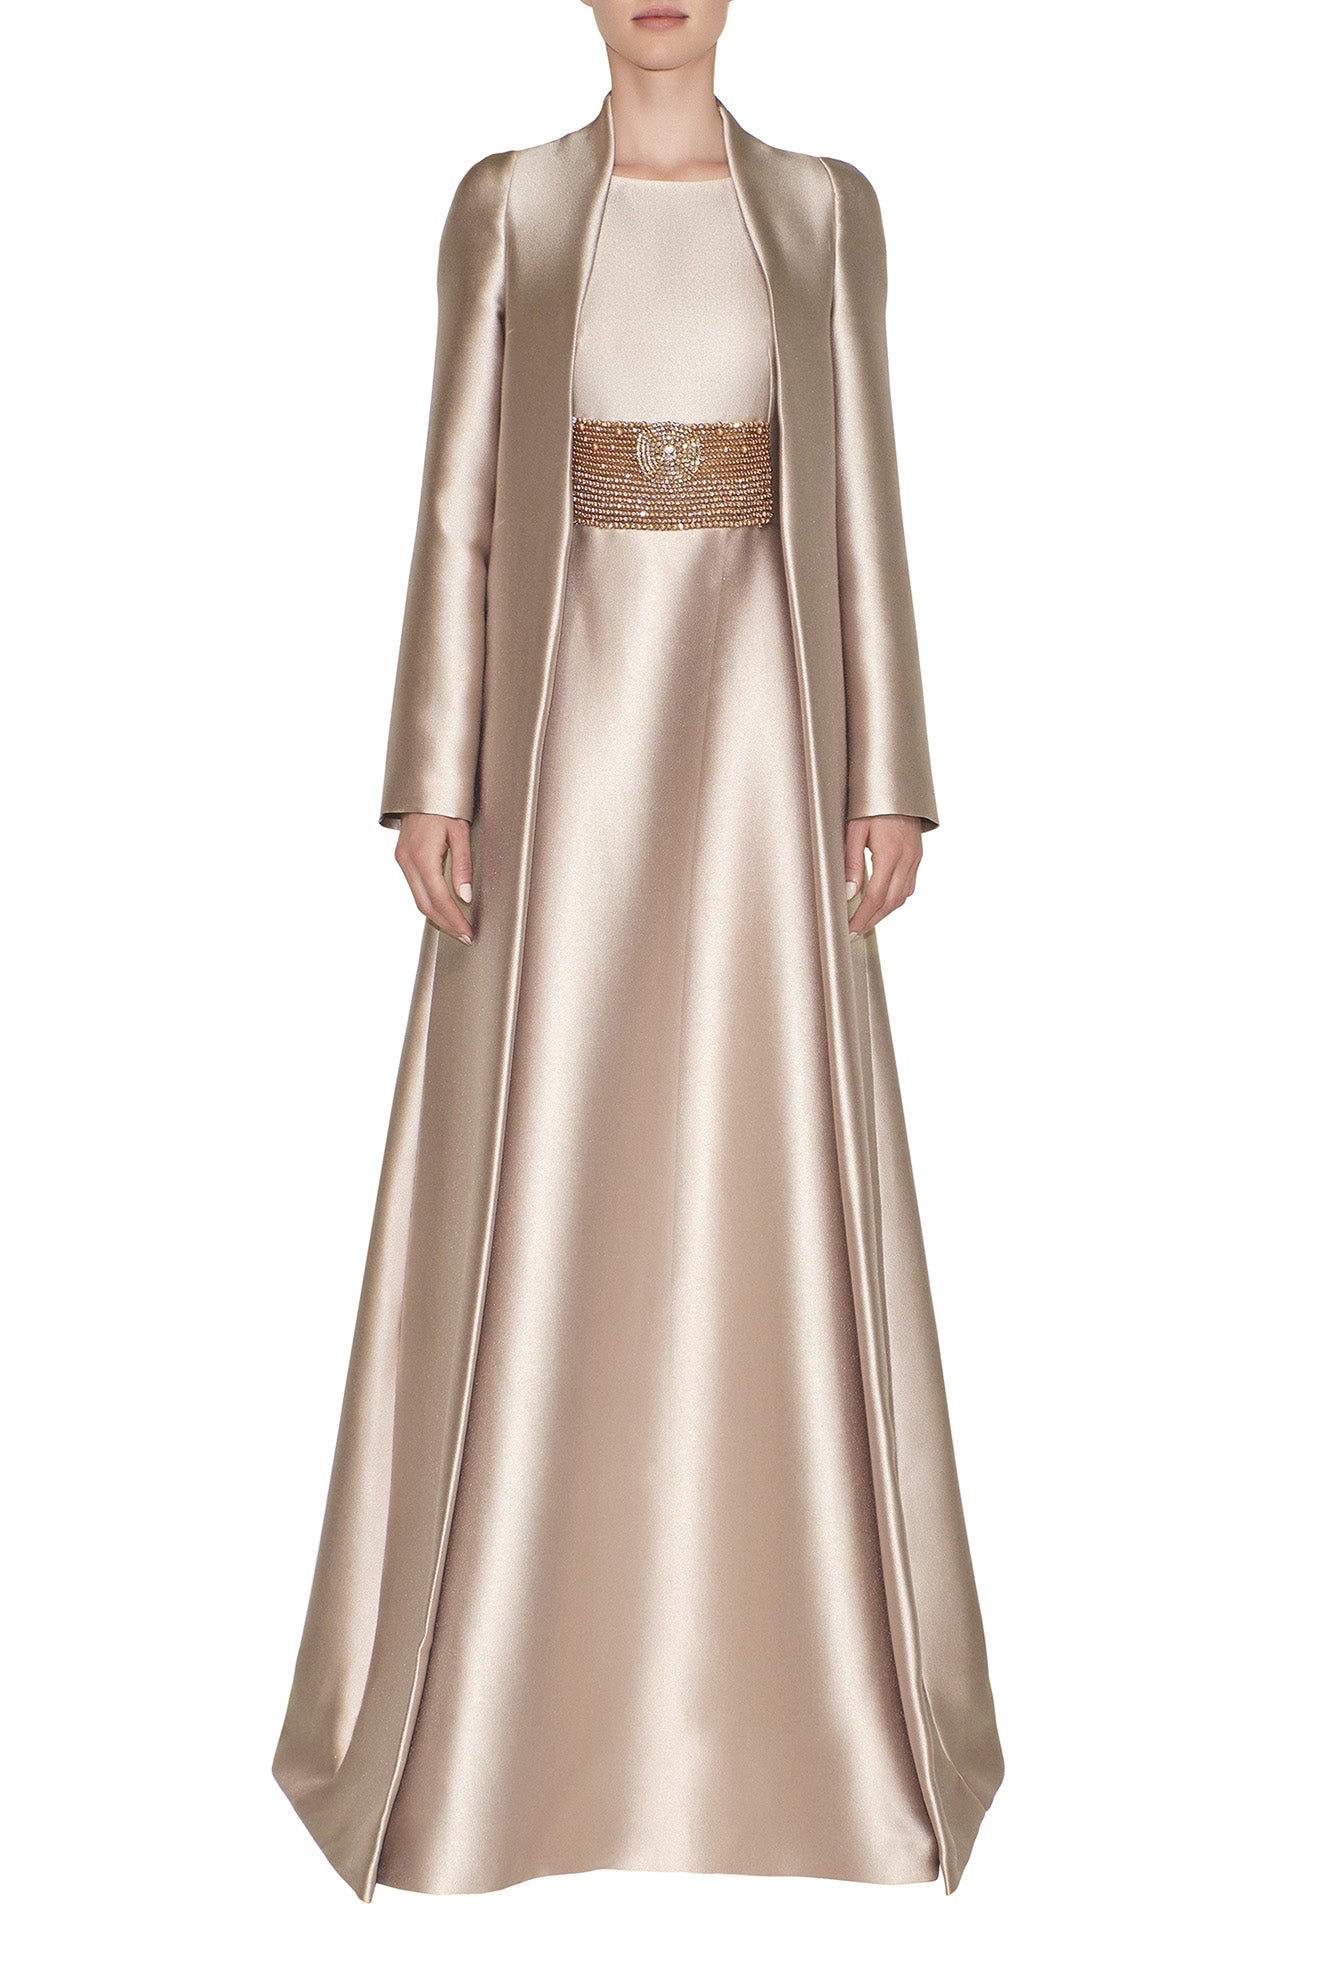 SLIM LONG SLEEVE, FAUX JACKET DRESS WITH EMBROIDERED WAIST DETAIL